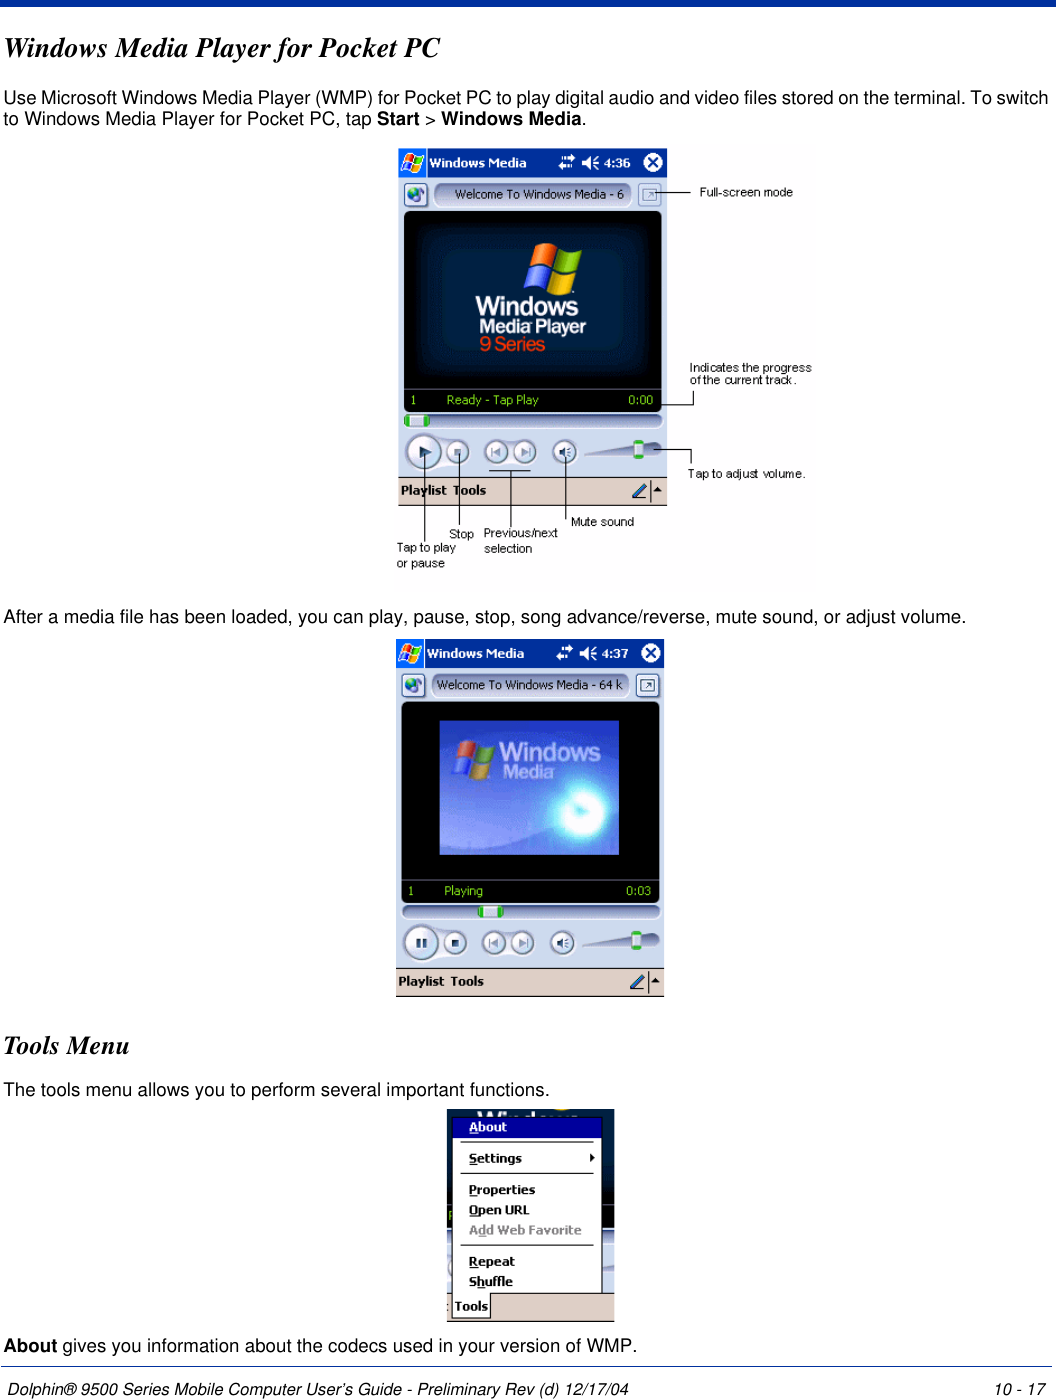 Dolphin® 9500 Series Mobile Computer User’s Guide - Preliminary Rev (d) 12/17/04 10 - 17Windows Media Player for Pocket PCUse Microsoft Windows Media Player (WMP) for Pocket PC to play digital audio and video files stored on the terminal. To switch to Windows Media Player for Pocket PC, tap Start &gt; Windows Media.After a media file has been loaded, you can play, pause, stop, song advance/reverse, mute sound, or adjust volume. Tools MenuThe tools menu allows you to perform several important functions. About gives you information about the codecs used in your version of WMP.